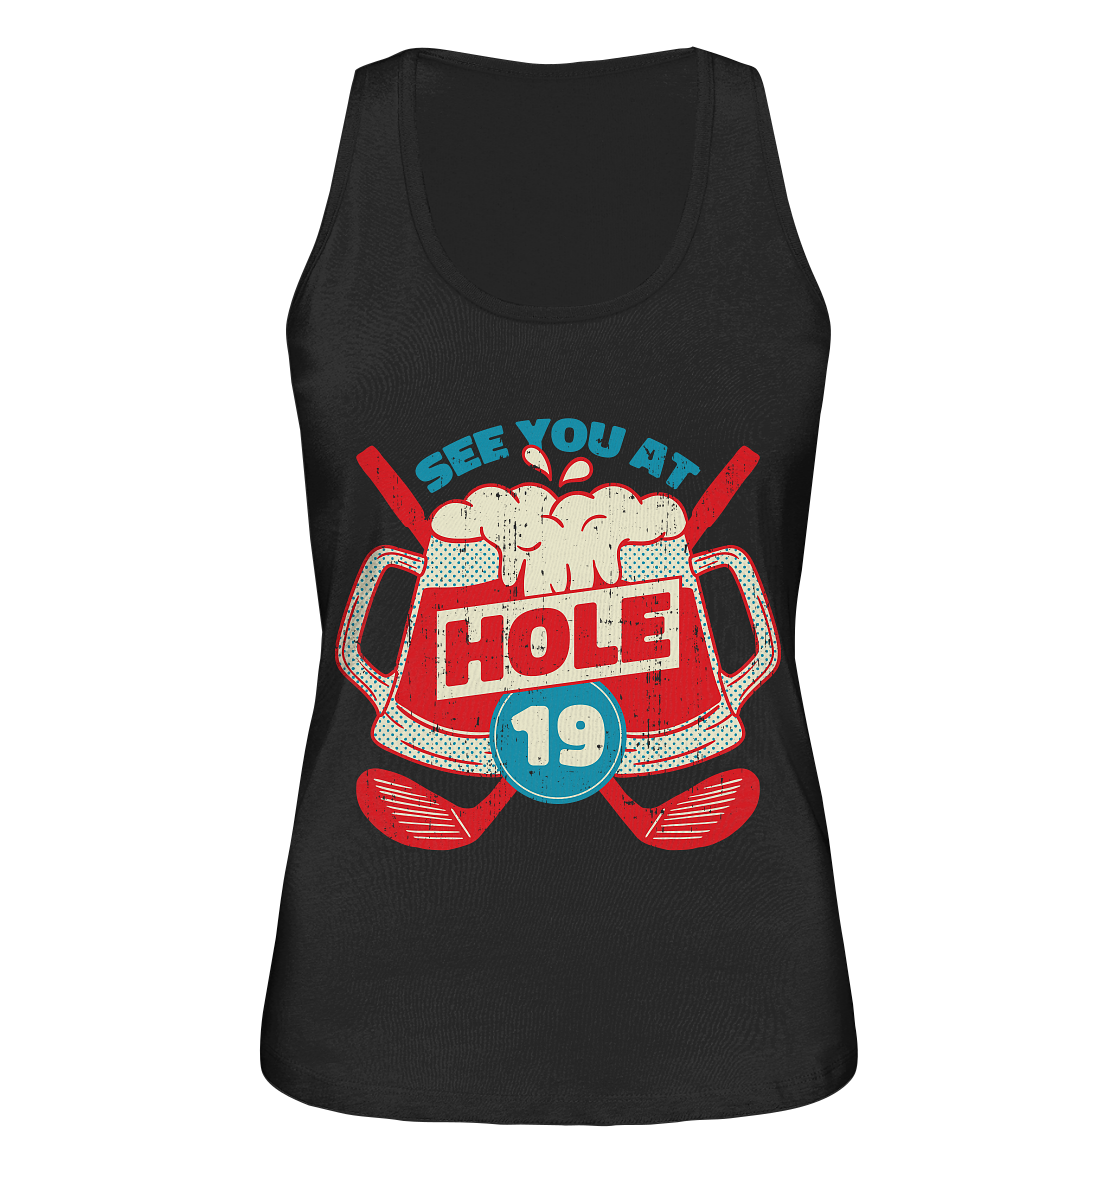 Golf ,See you at Hole 19, See you at Hole 19 - Ladies Organic Tank Top